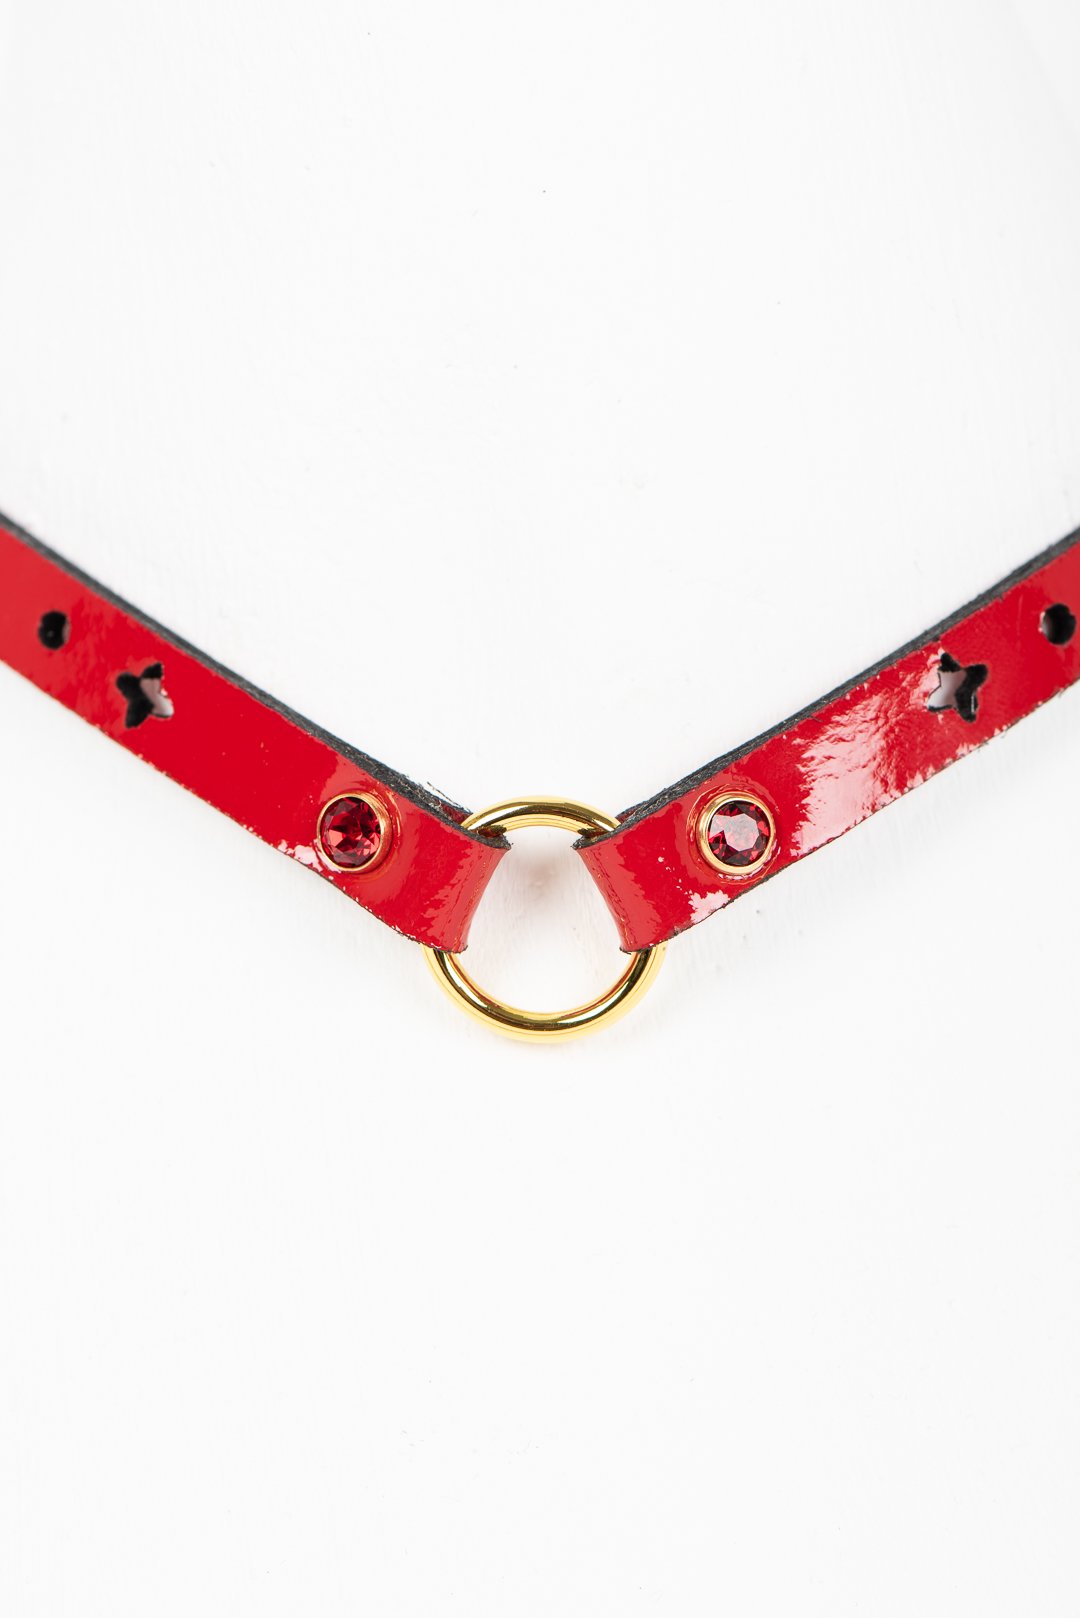 Luxury Patent Leather Collar with Crystal Rivets Buy Online at Fraulein Kink